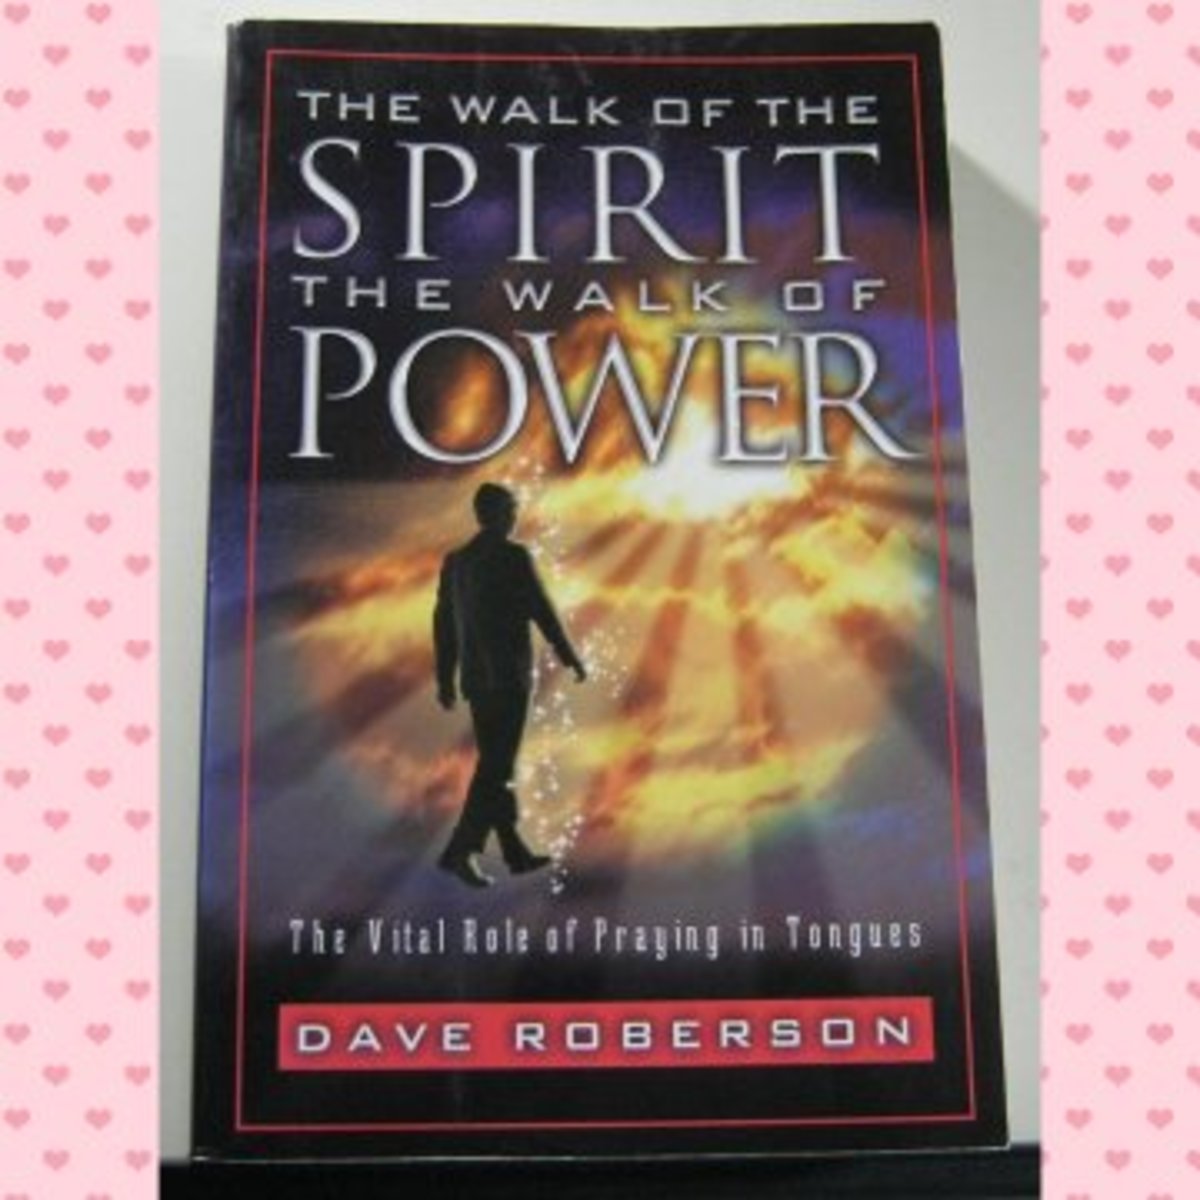 The Walk of the Spirit the Walk of Power by Dave Roberson #4 Book Review